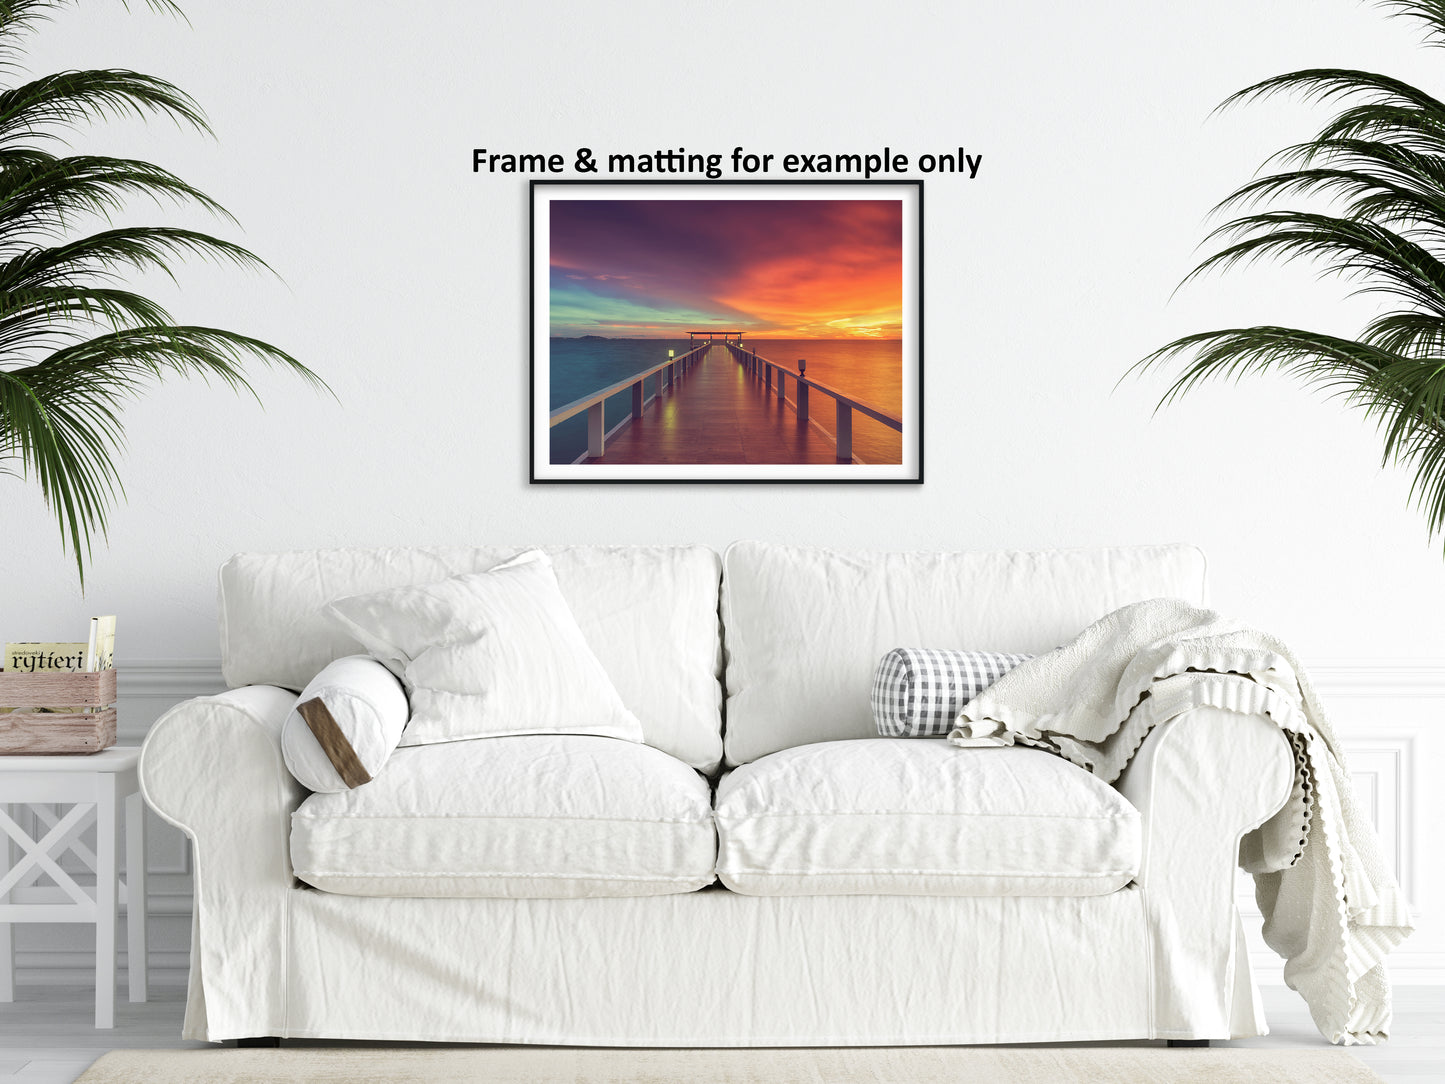 Living Room Artwork Prints: Surreal Wooden Pier At Sunset with Intrigued Effect Landscape Photo Loose Wall Art Prints